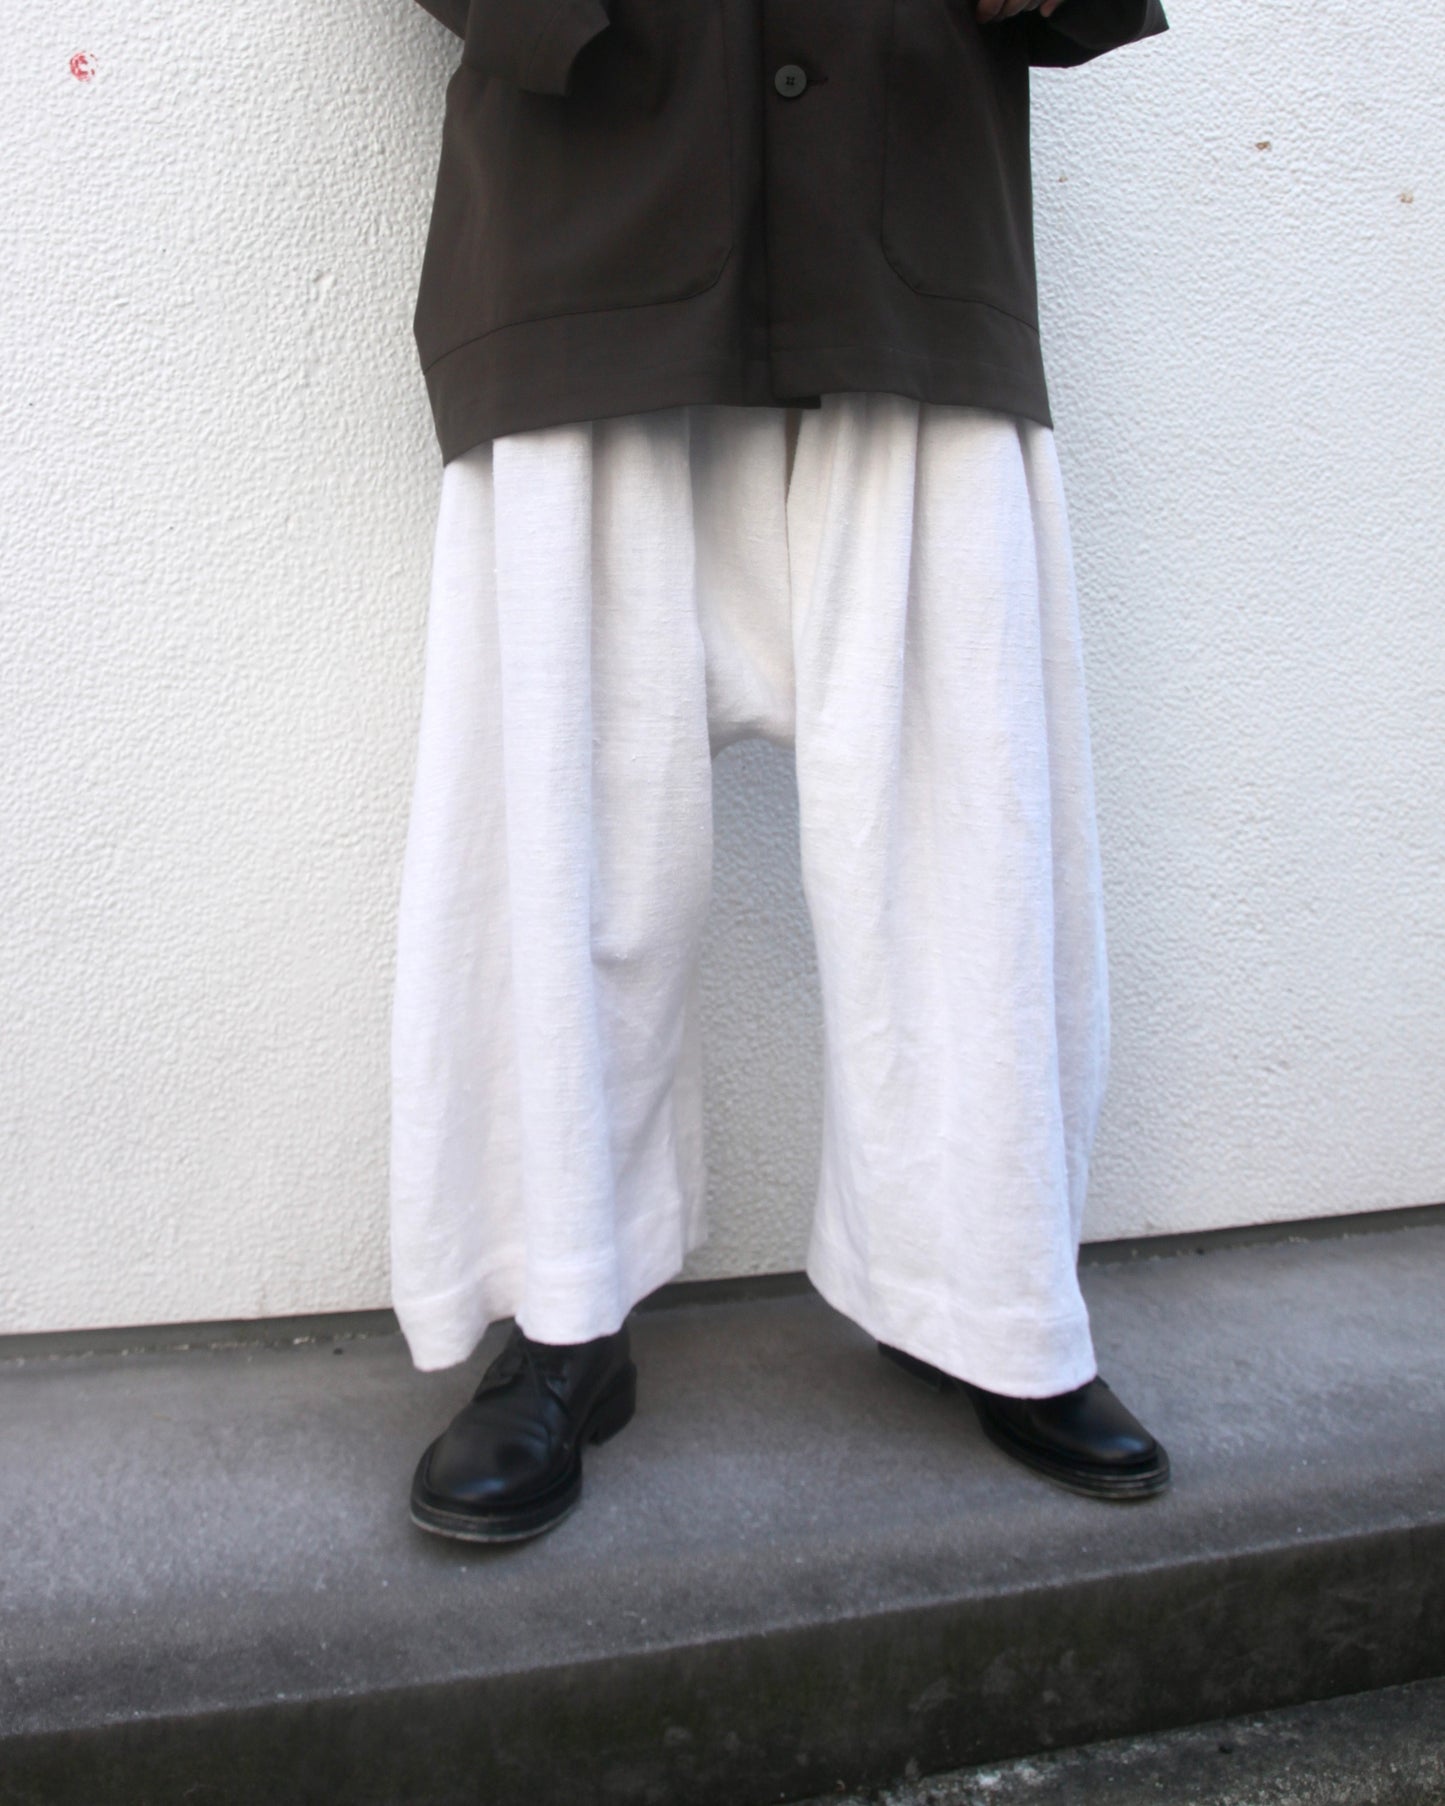 【Whiteread / ホワイトリード】Drop Crotch Trousers - Natural Linen